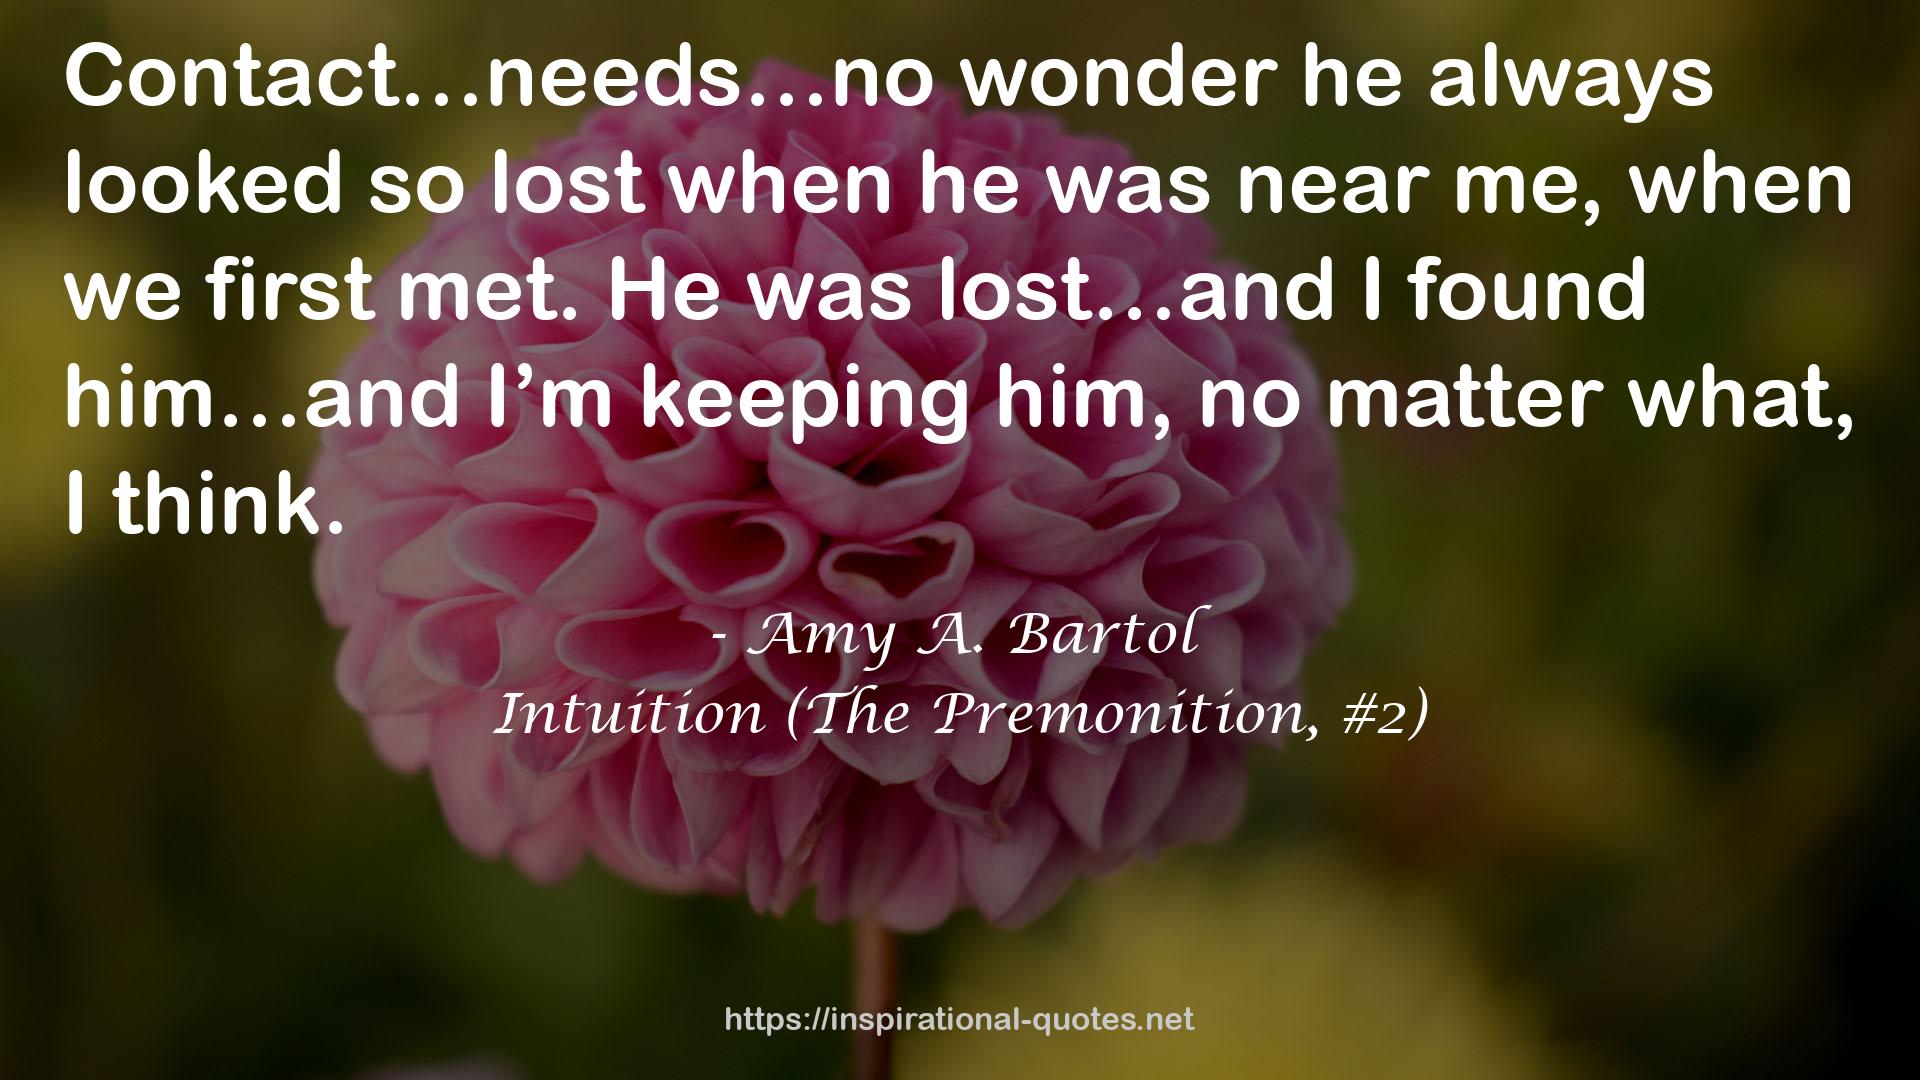 Intuition (The Premonition, #2) QUOTES